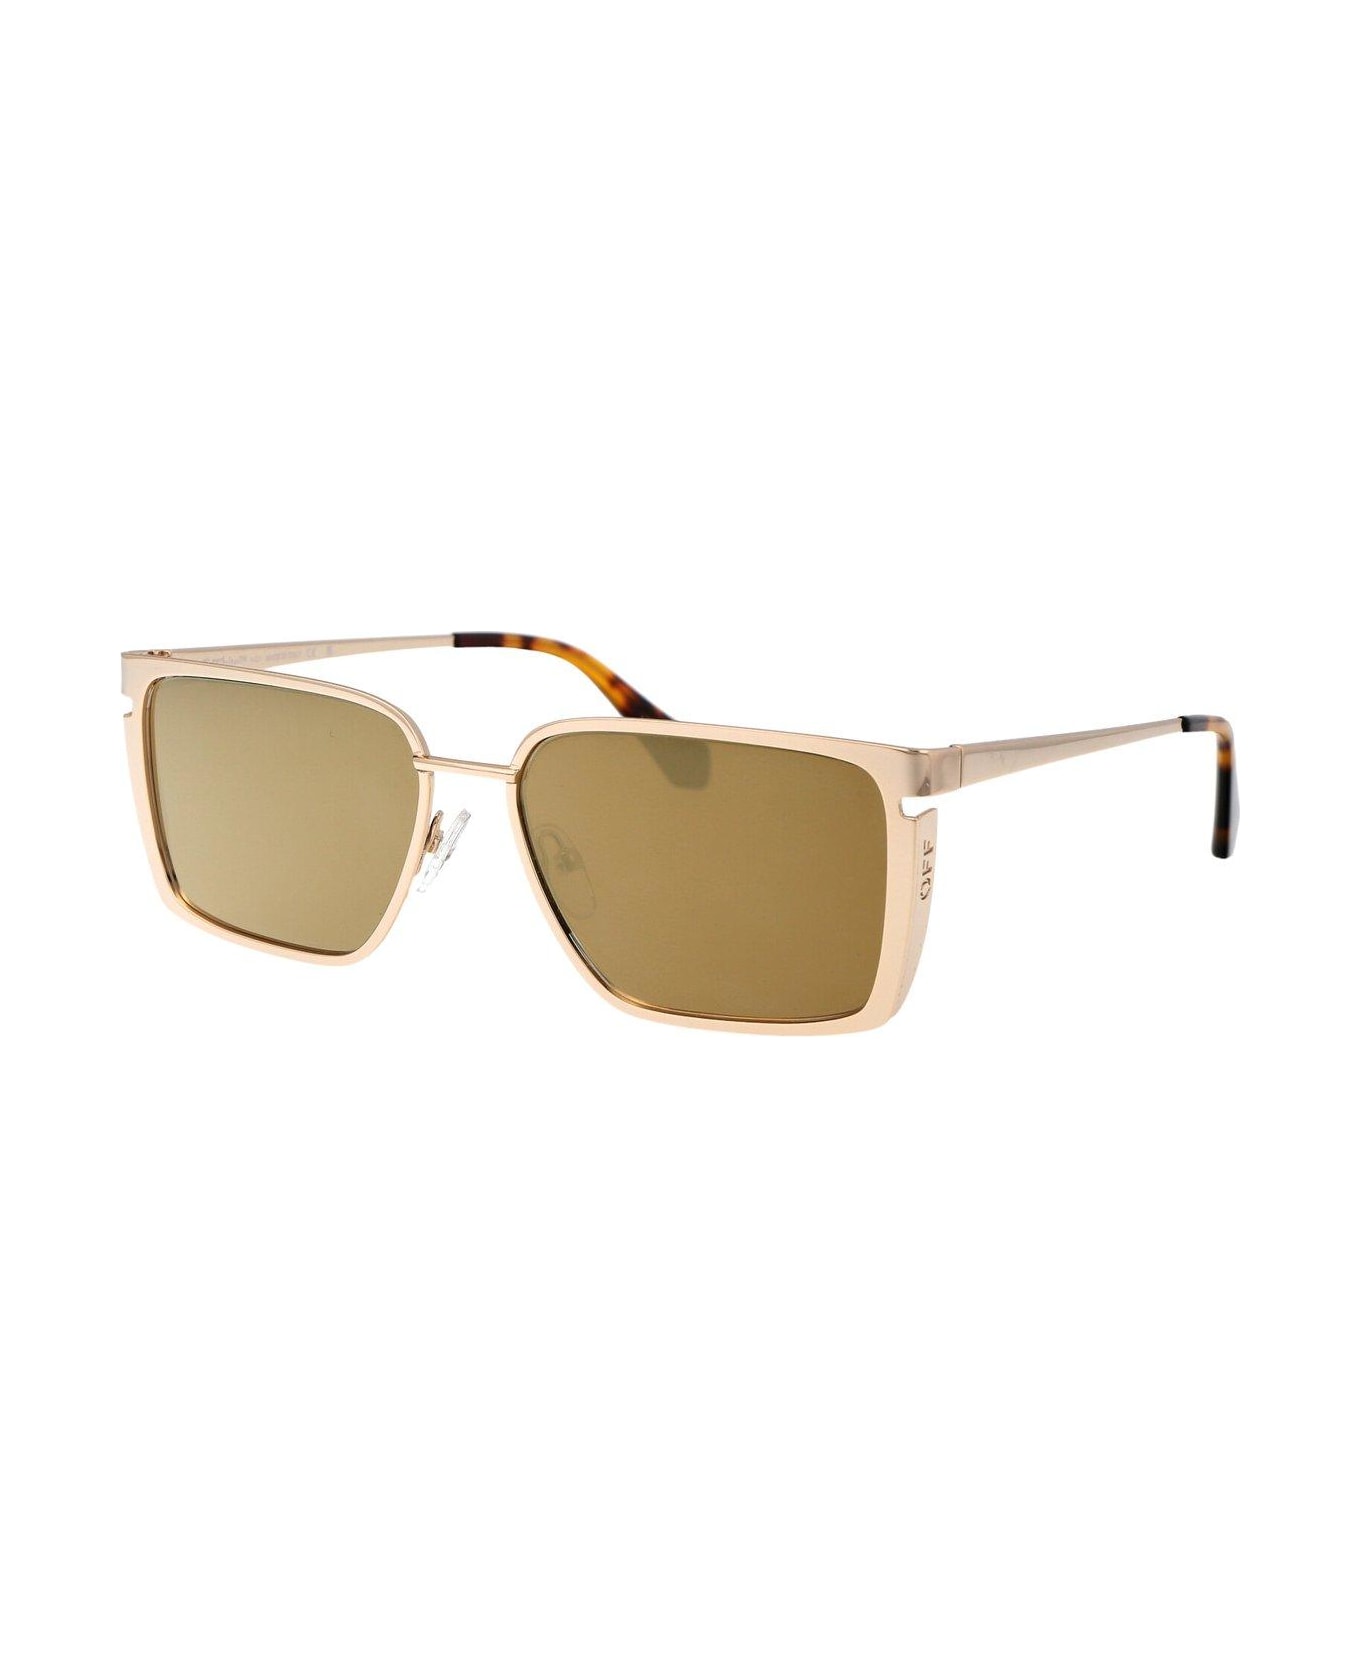 Off-White Yoder Sunglasses - 7676 GOLD GOLD